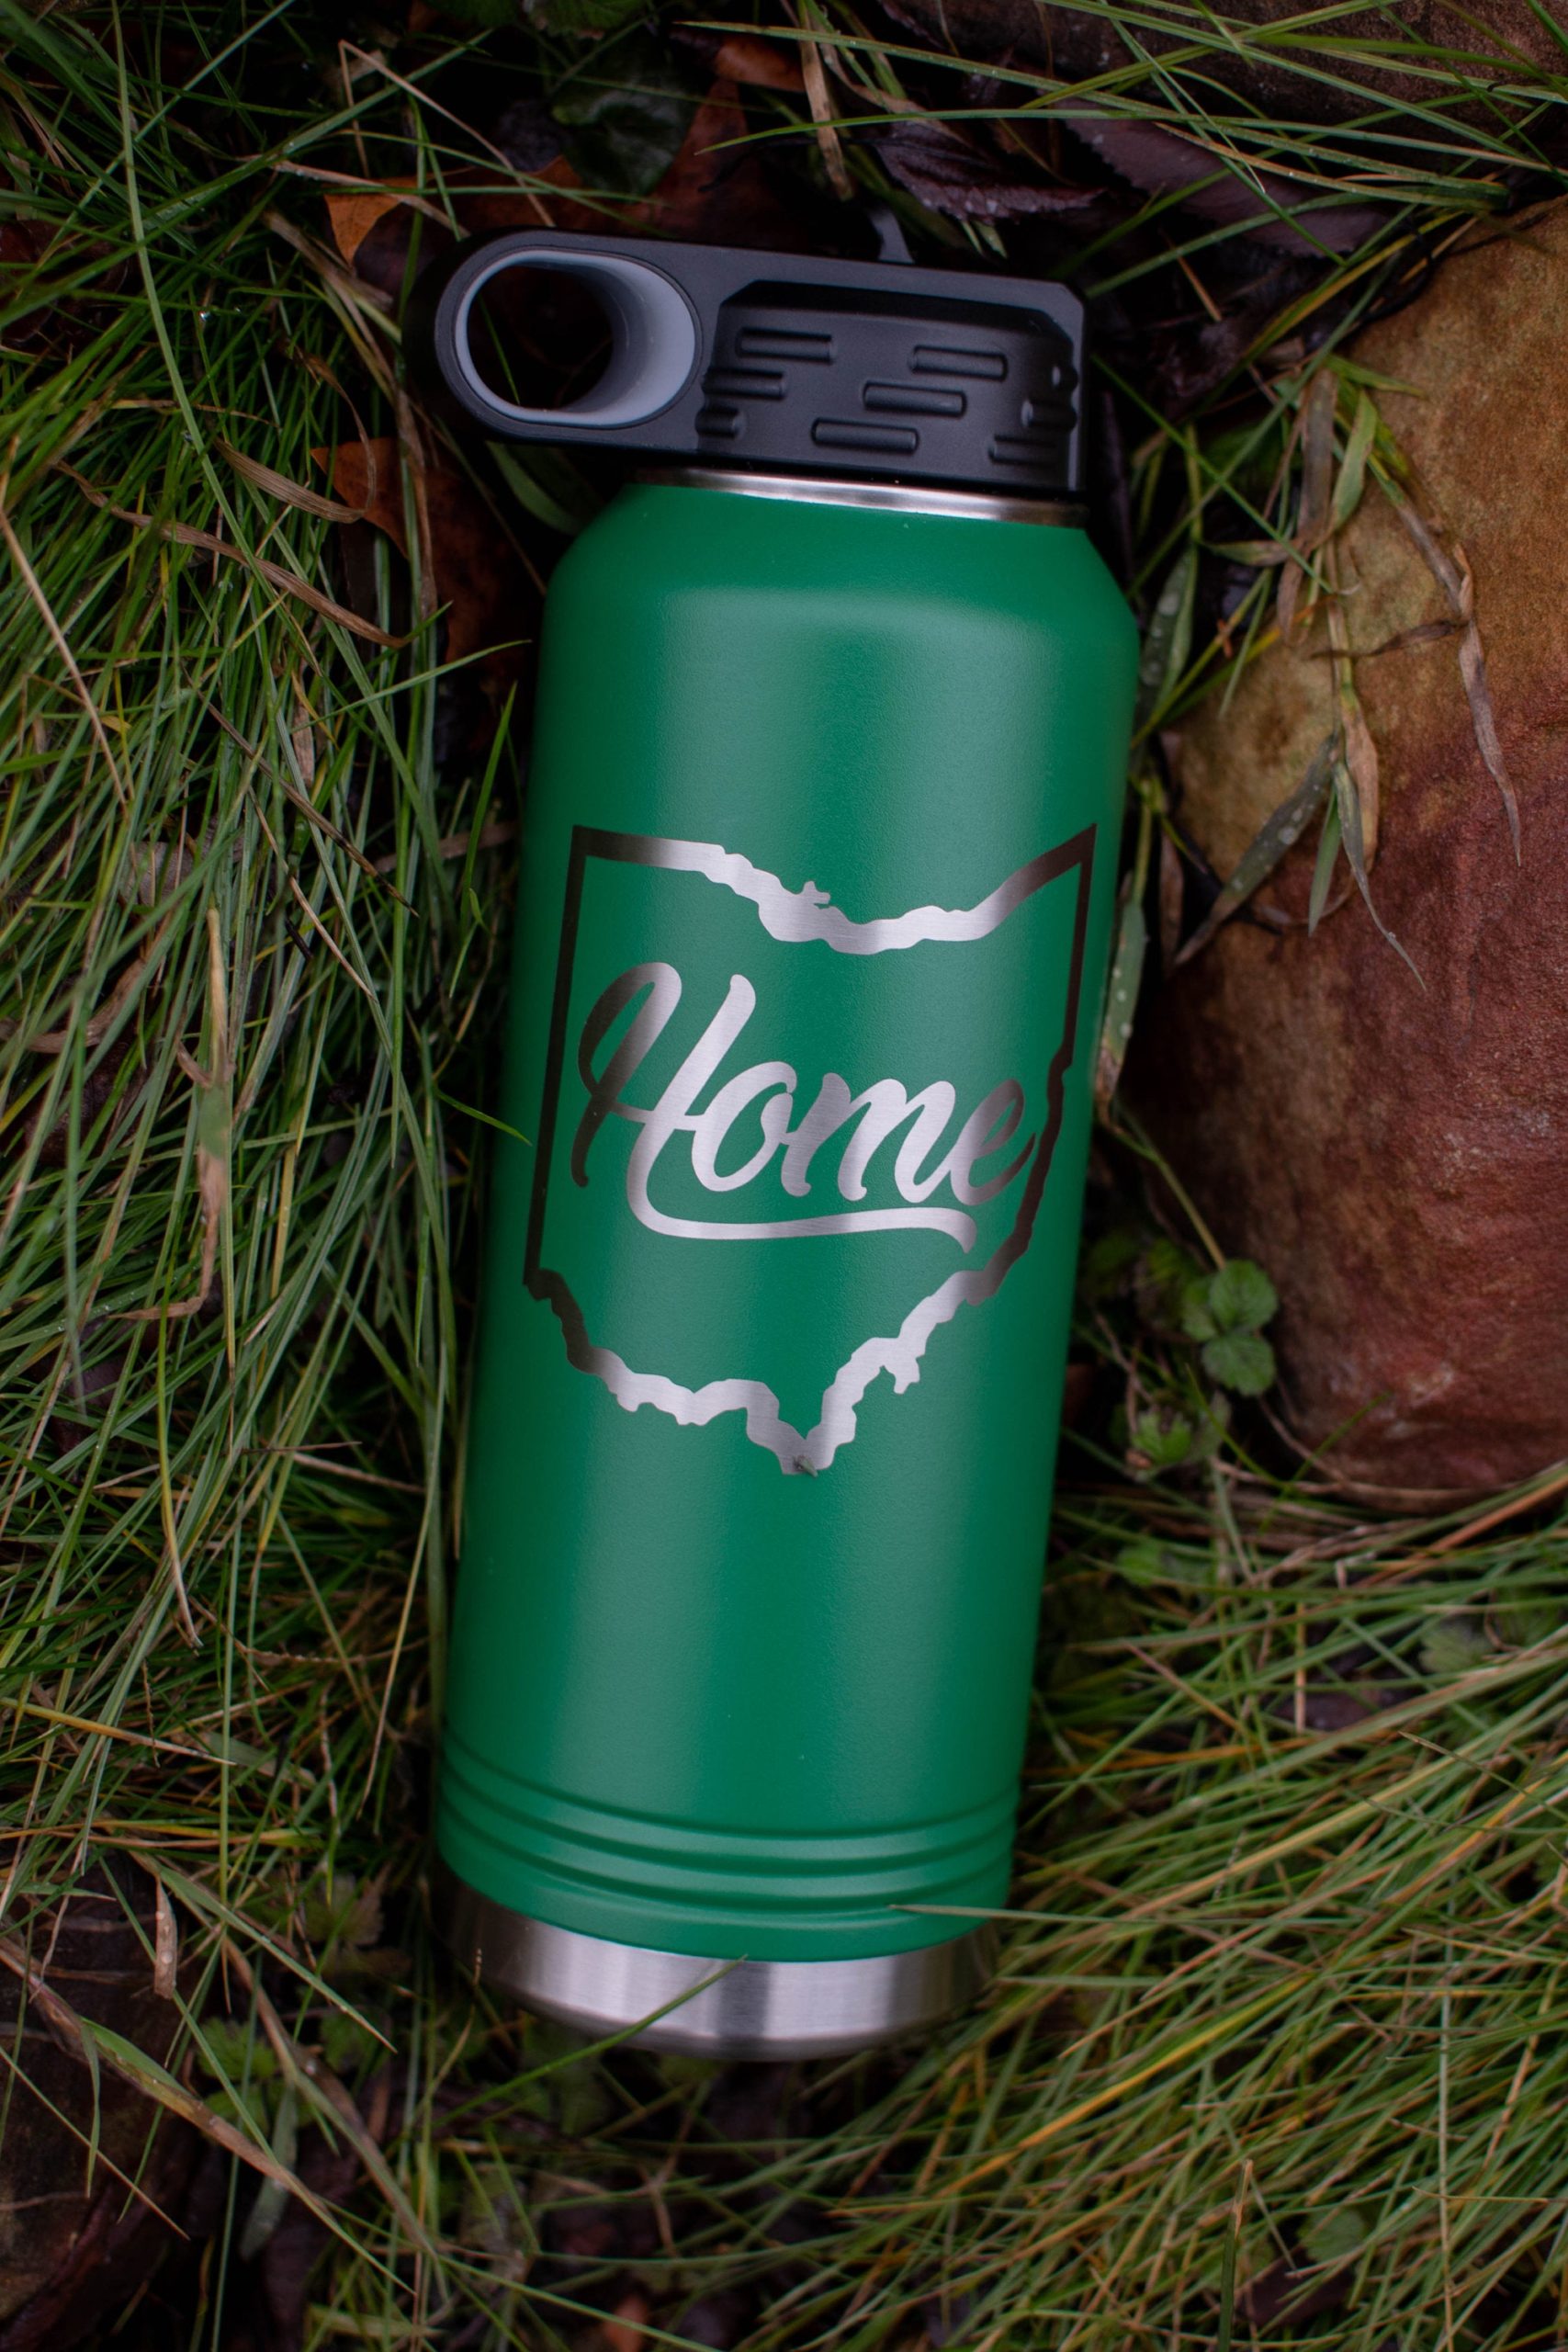 https://3cetching.com/wp-content/uploads/2021/07/ohio-home-engraved-stainless-steel-tumbler-yeti-style-cup-i-love-ohio-cup-60f713ce-scaled.jpg